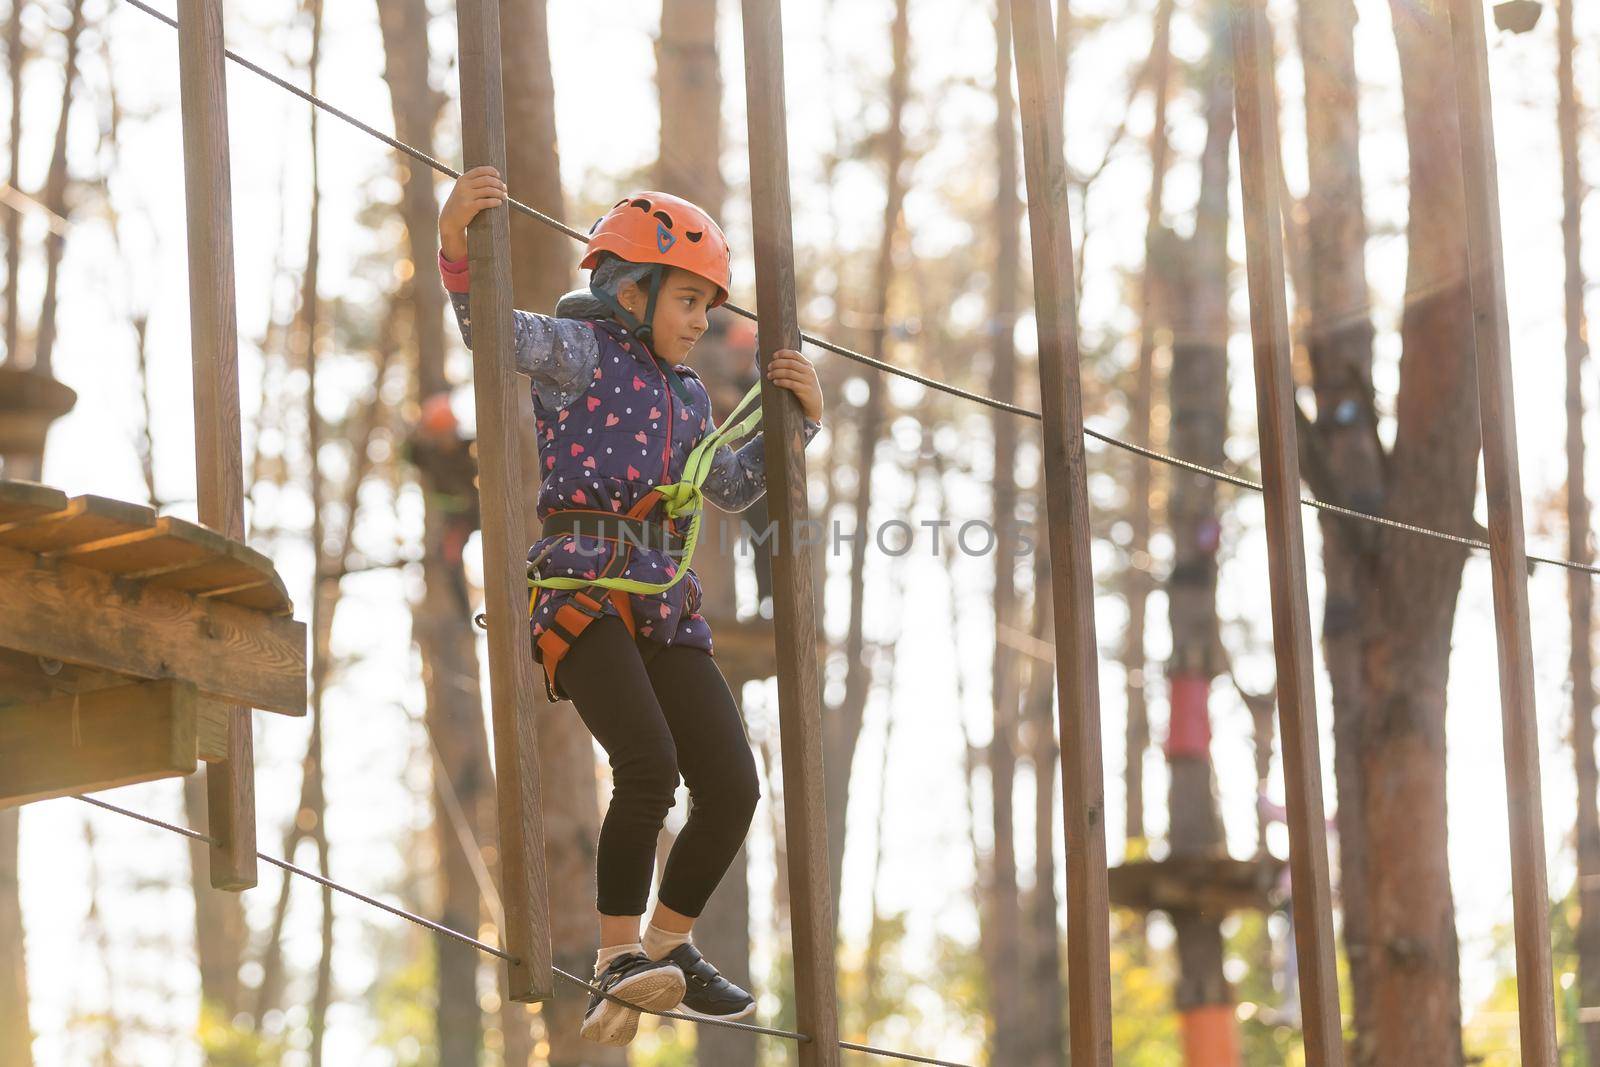 Girl climbing in adventure park is a place which can contain a wide variety of elements, such as rope climbing exercises, obstacle courses and zip-lines.